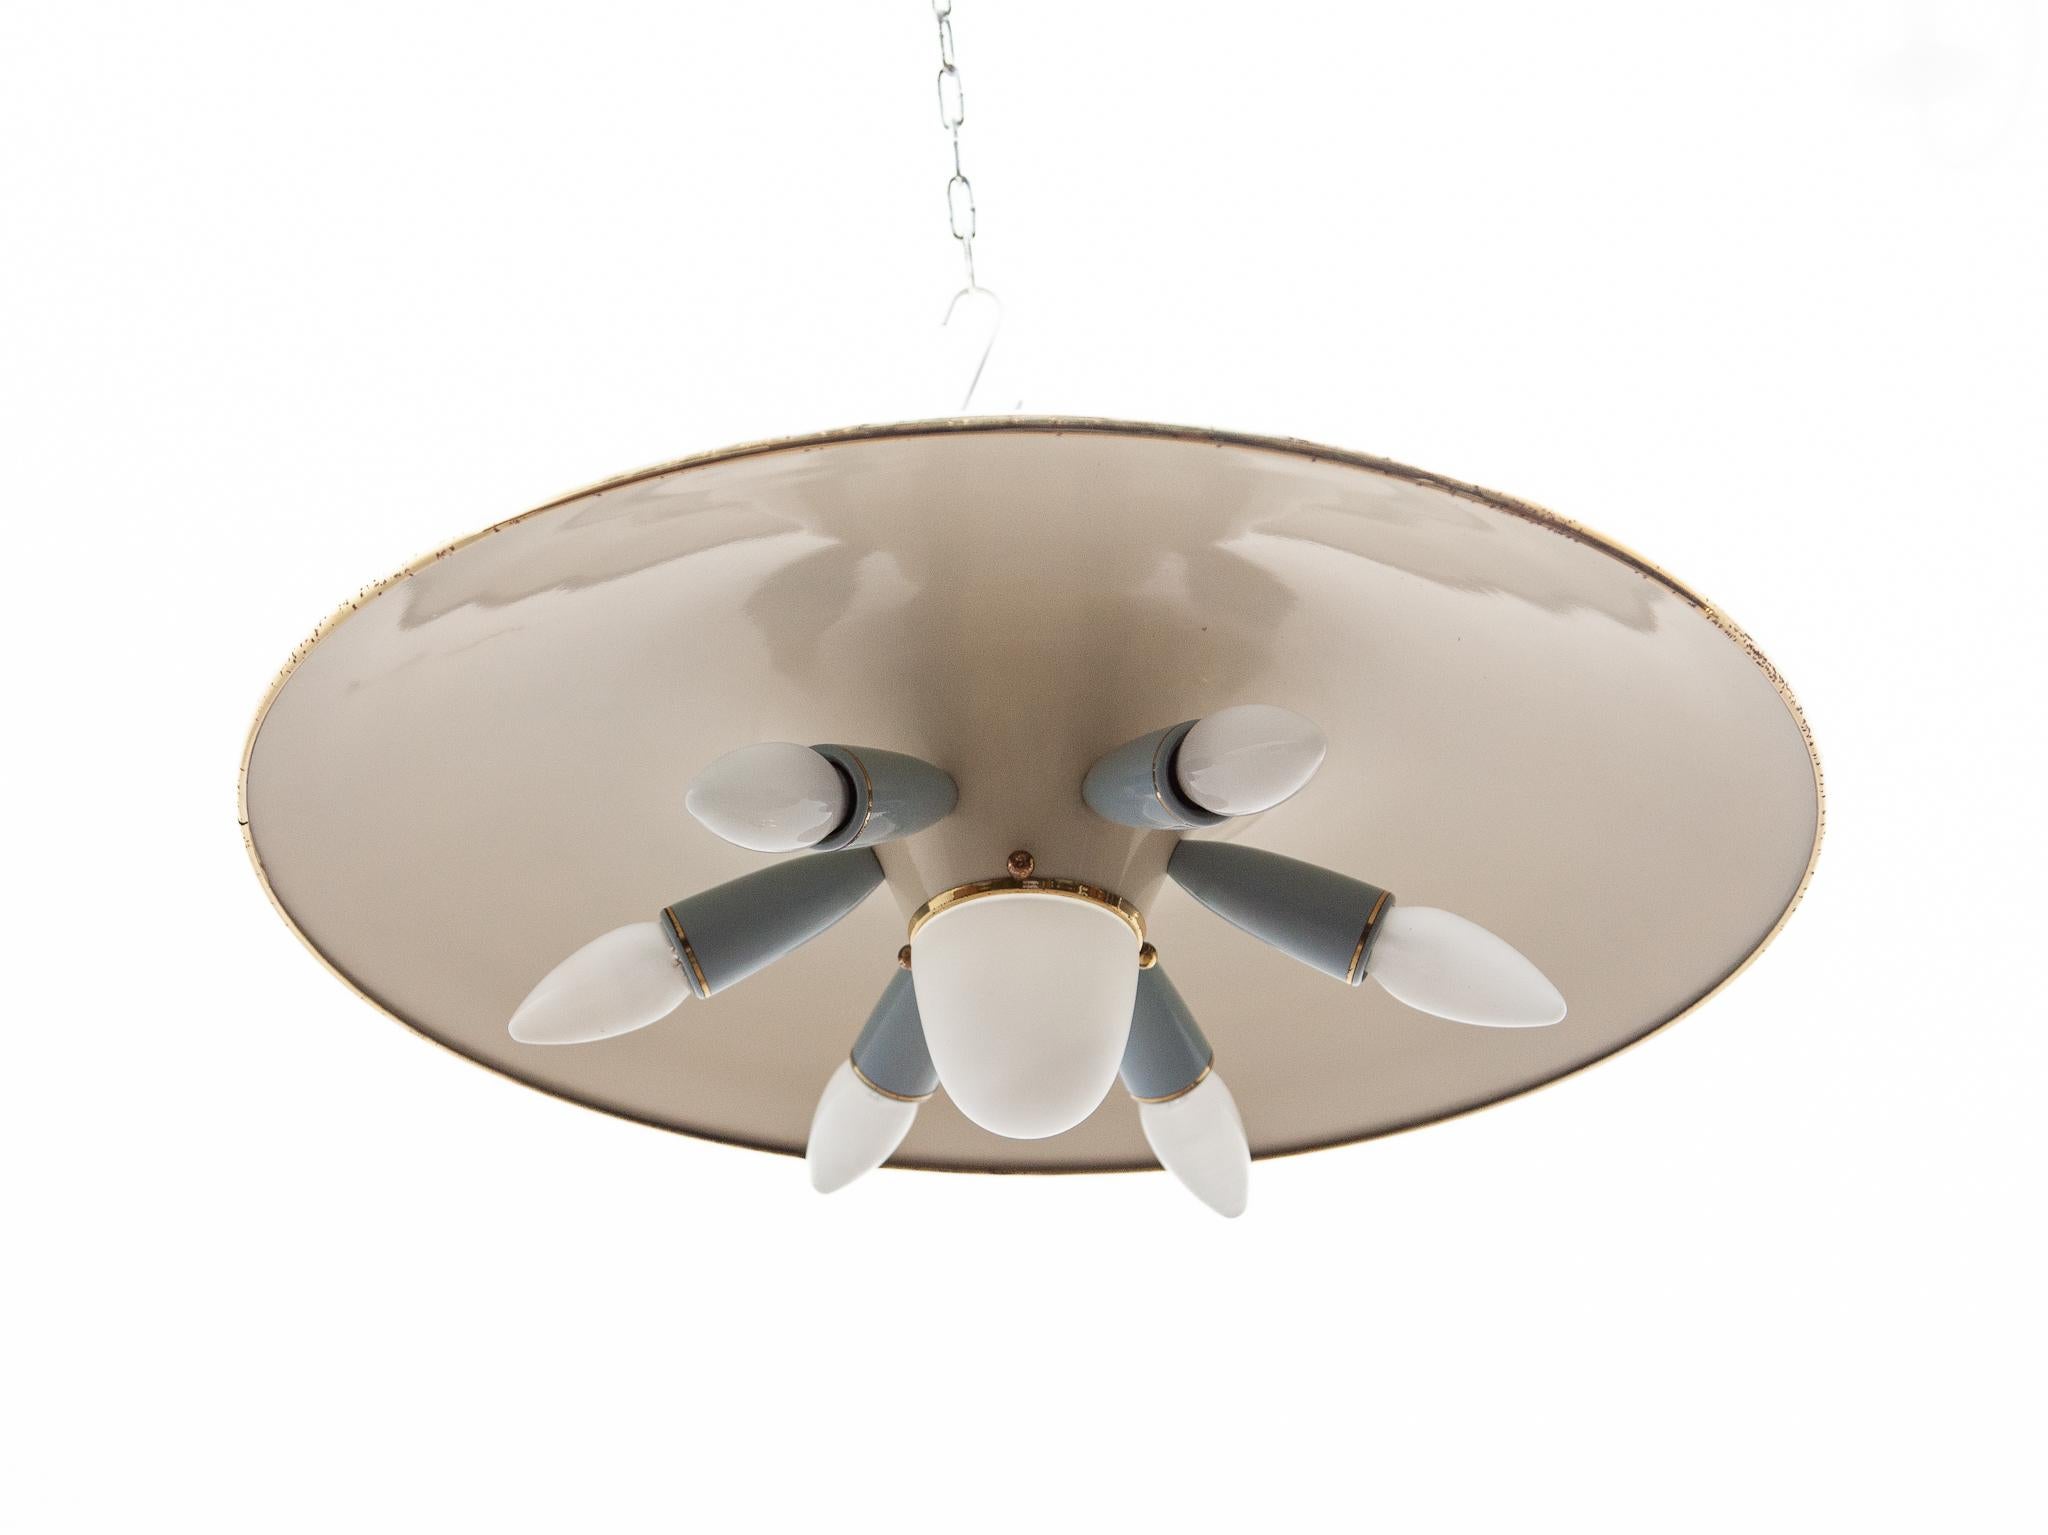 Mid-20th Century Round Flush Mount Fifties Sputnik, Italy, 1950s For Sale